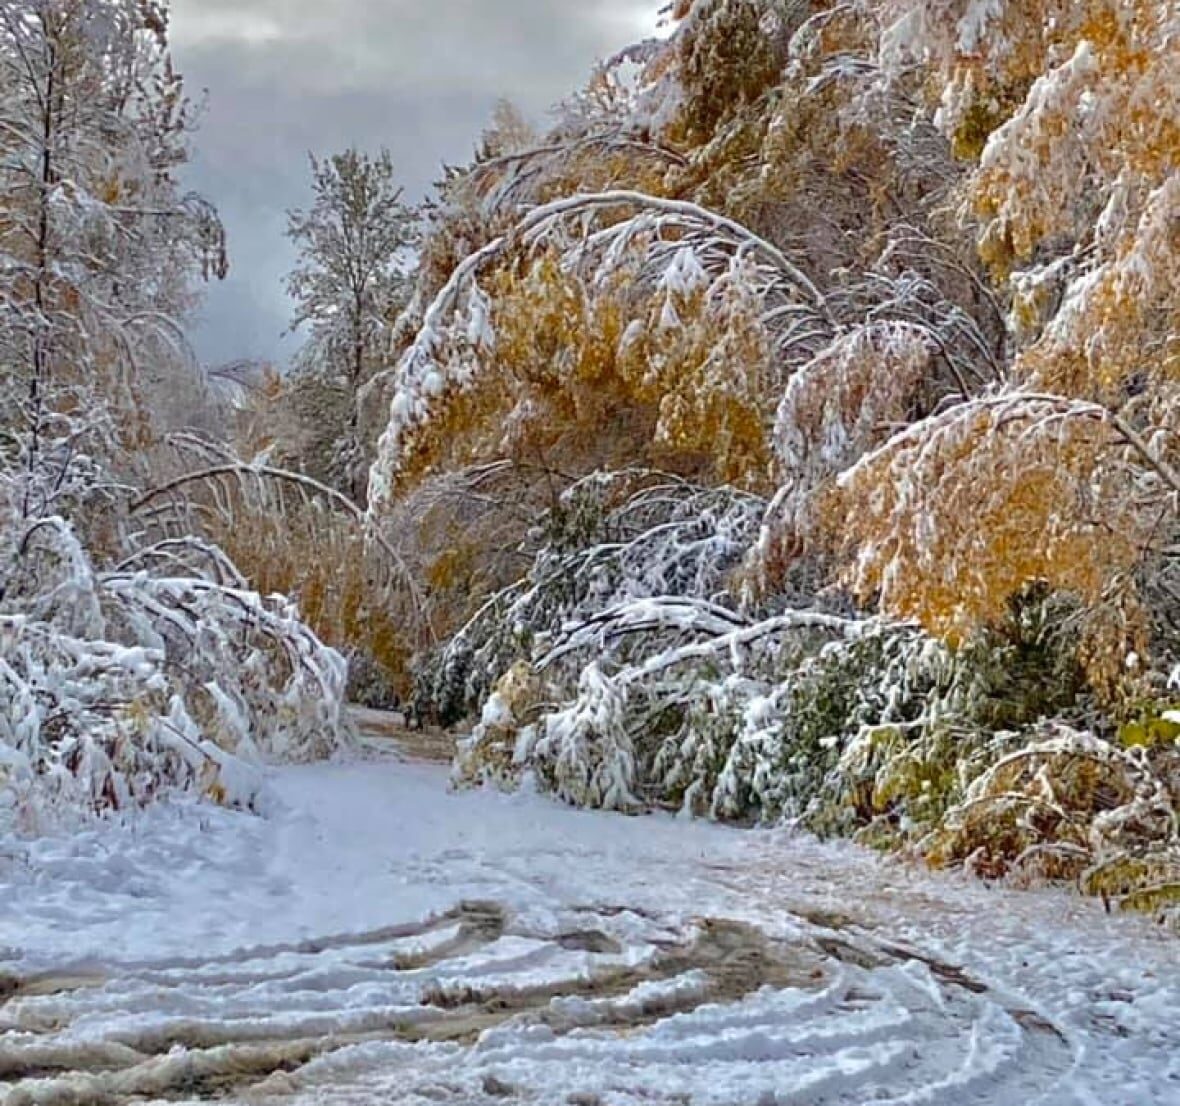 Mayo, Yukon, after the territory's first snowfall on Sept. 22. Mayo resident Millie Olsen says it's the first time she's seen so much snow while the trees still have their colourful fall leaves.